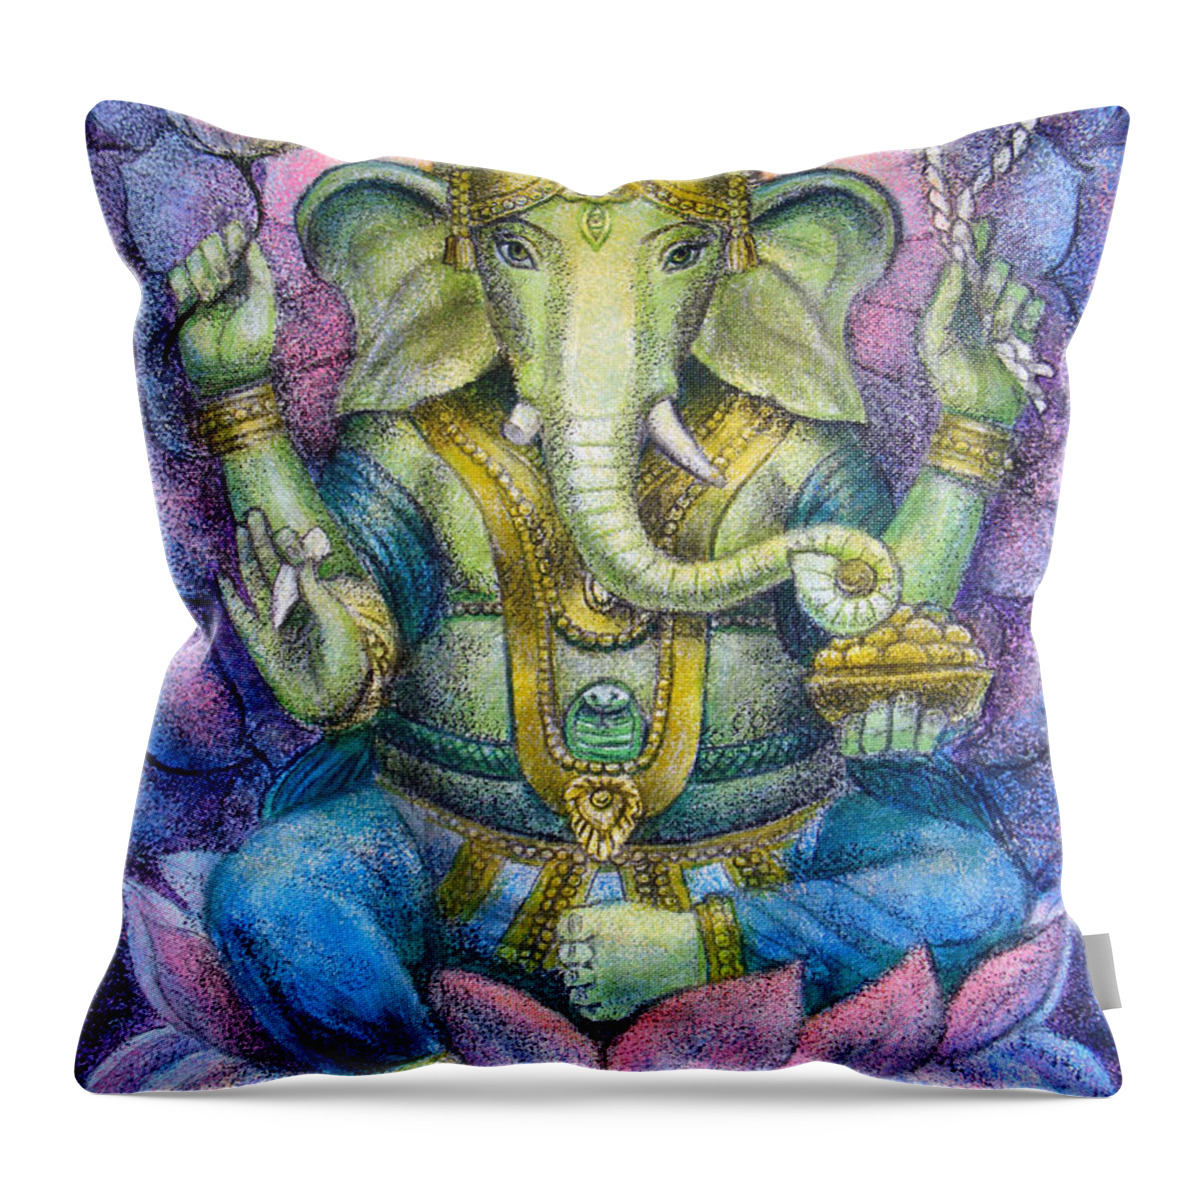 Lord Ganesha Throw Pillow featuring the painting Lotus Ganesha by Sue Halstenberg